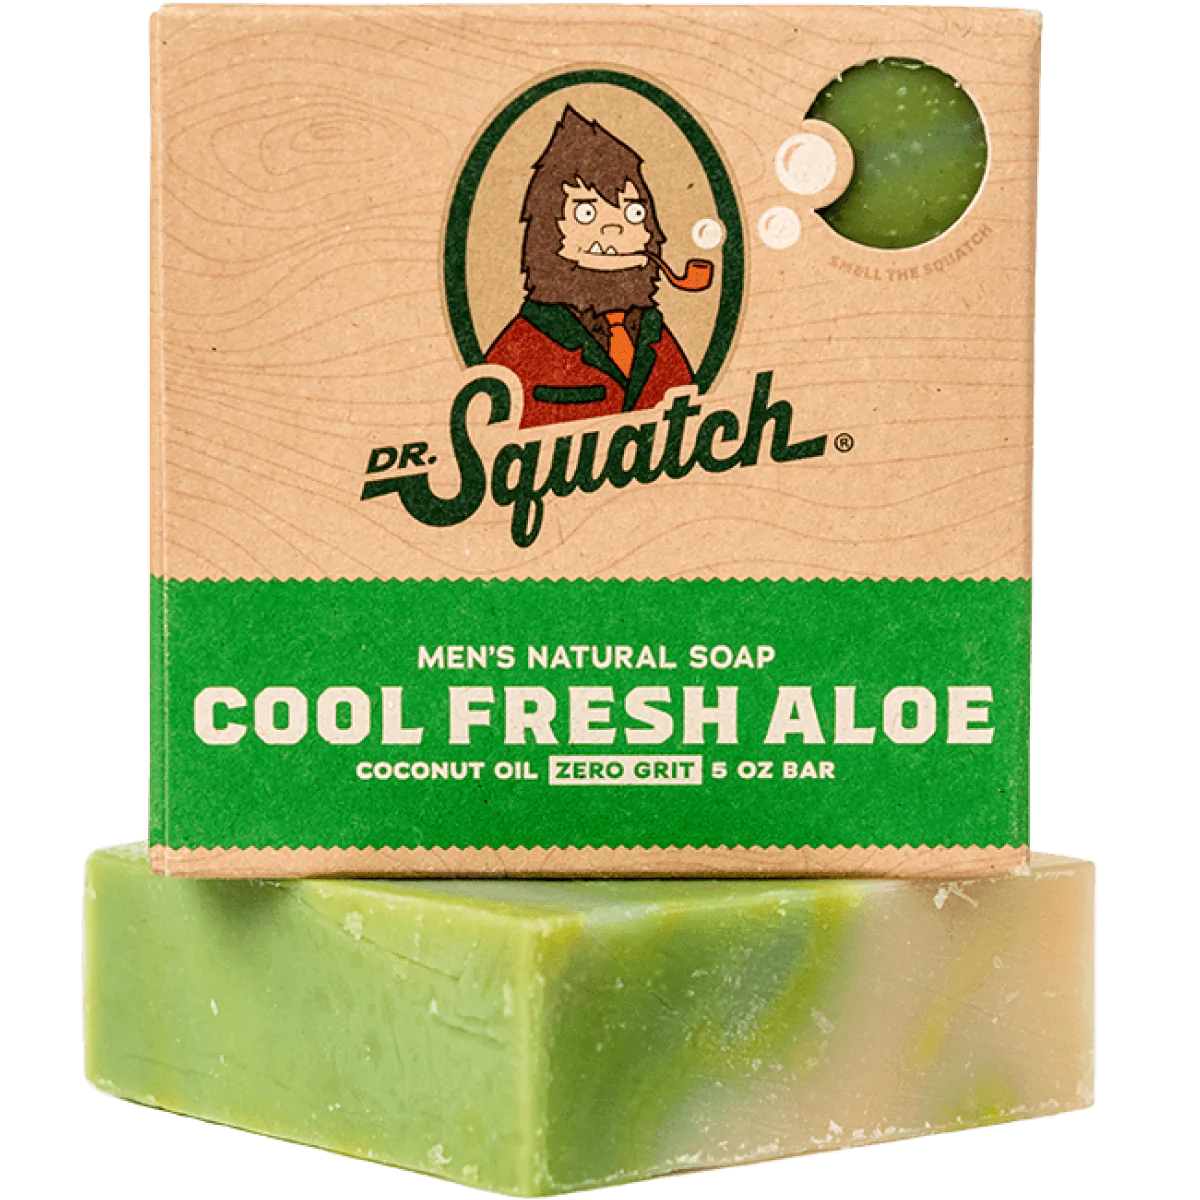 Cool Fresh Aloe Soap Bar by Dr. Squatch--Lemons and Limes Boutique